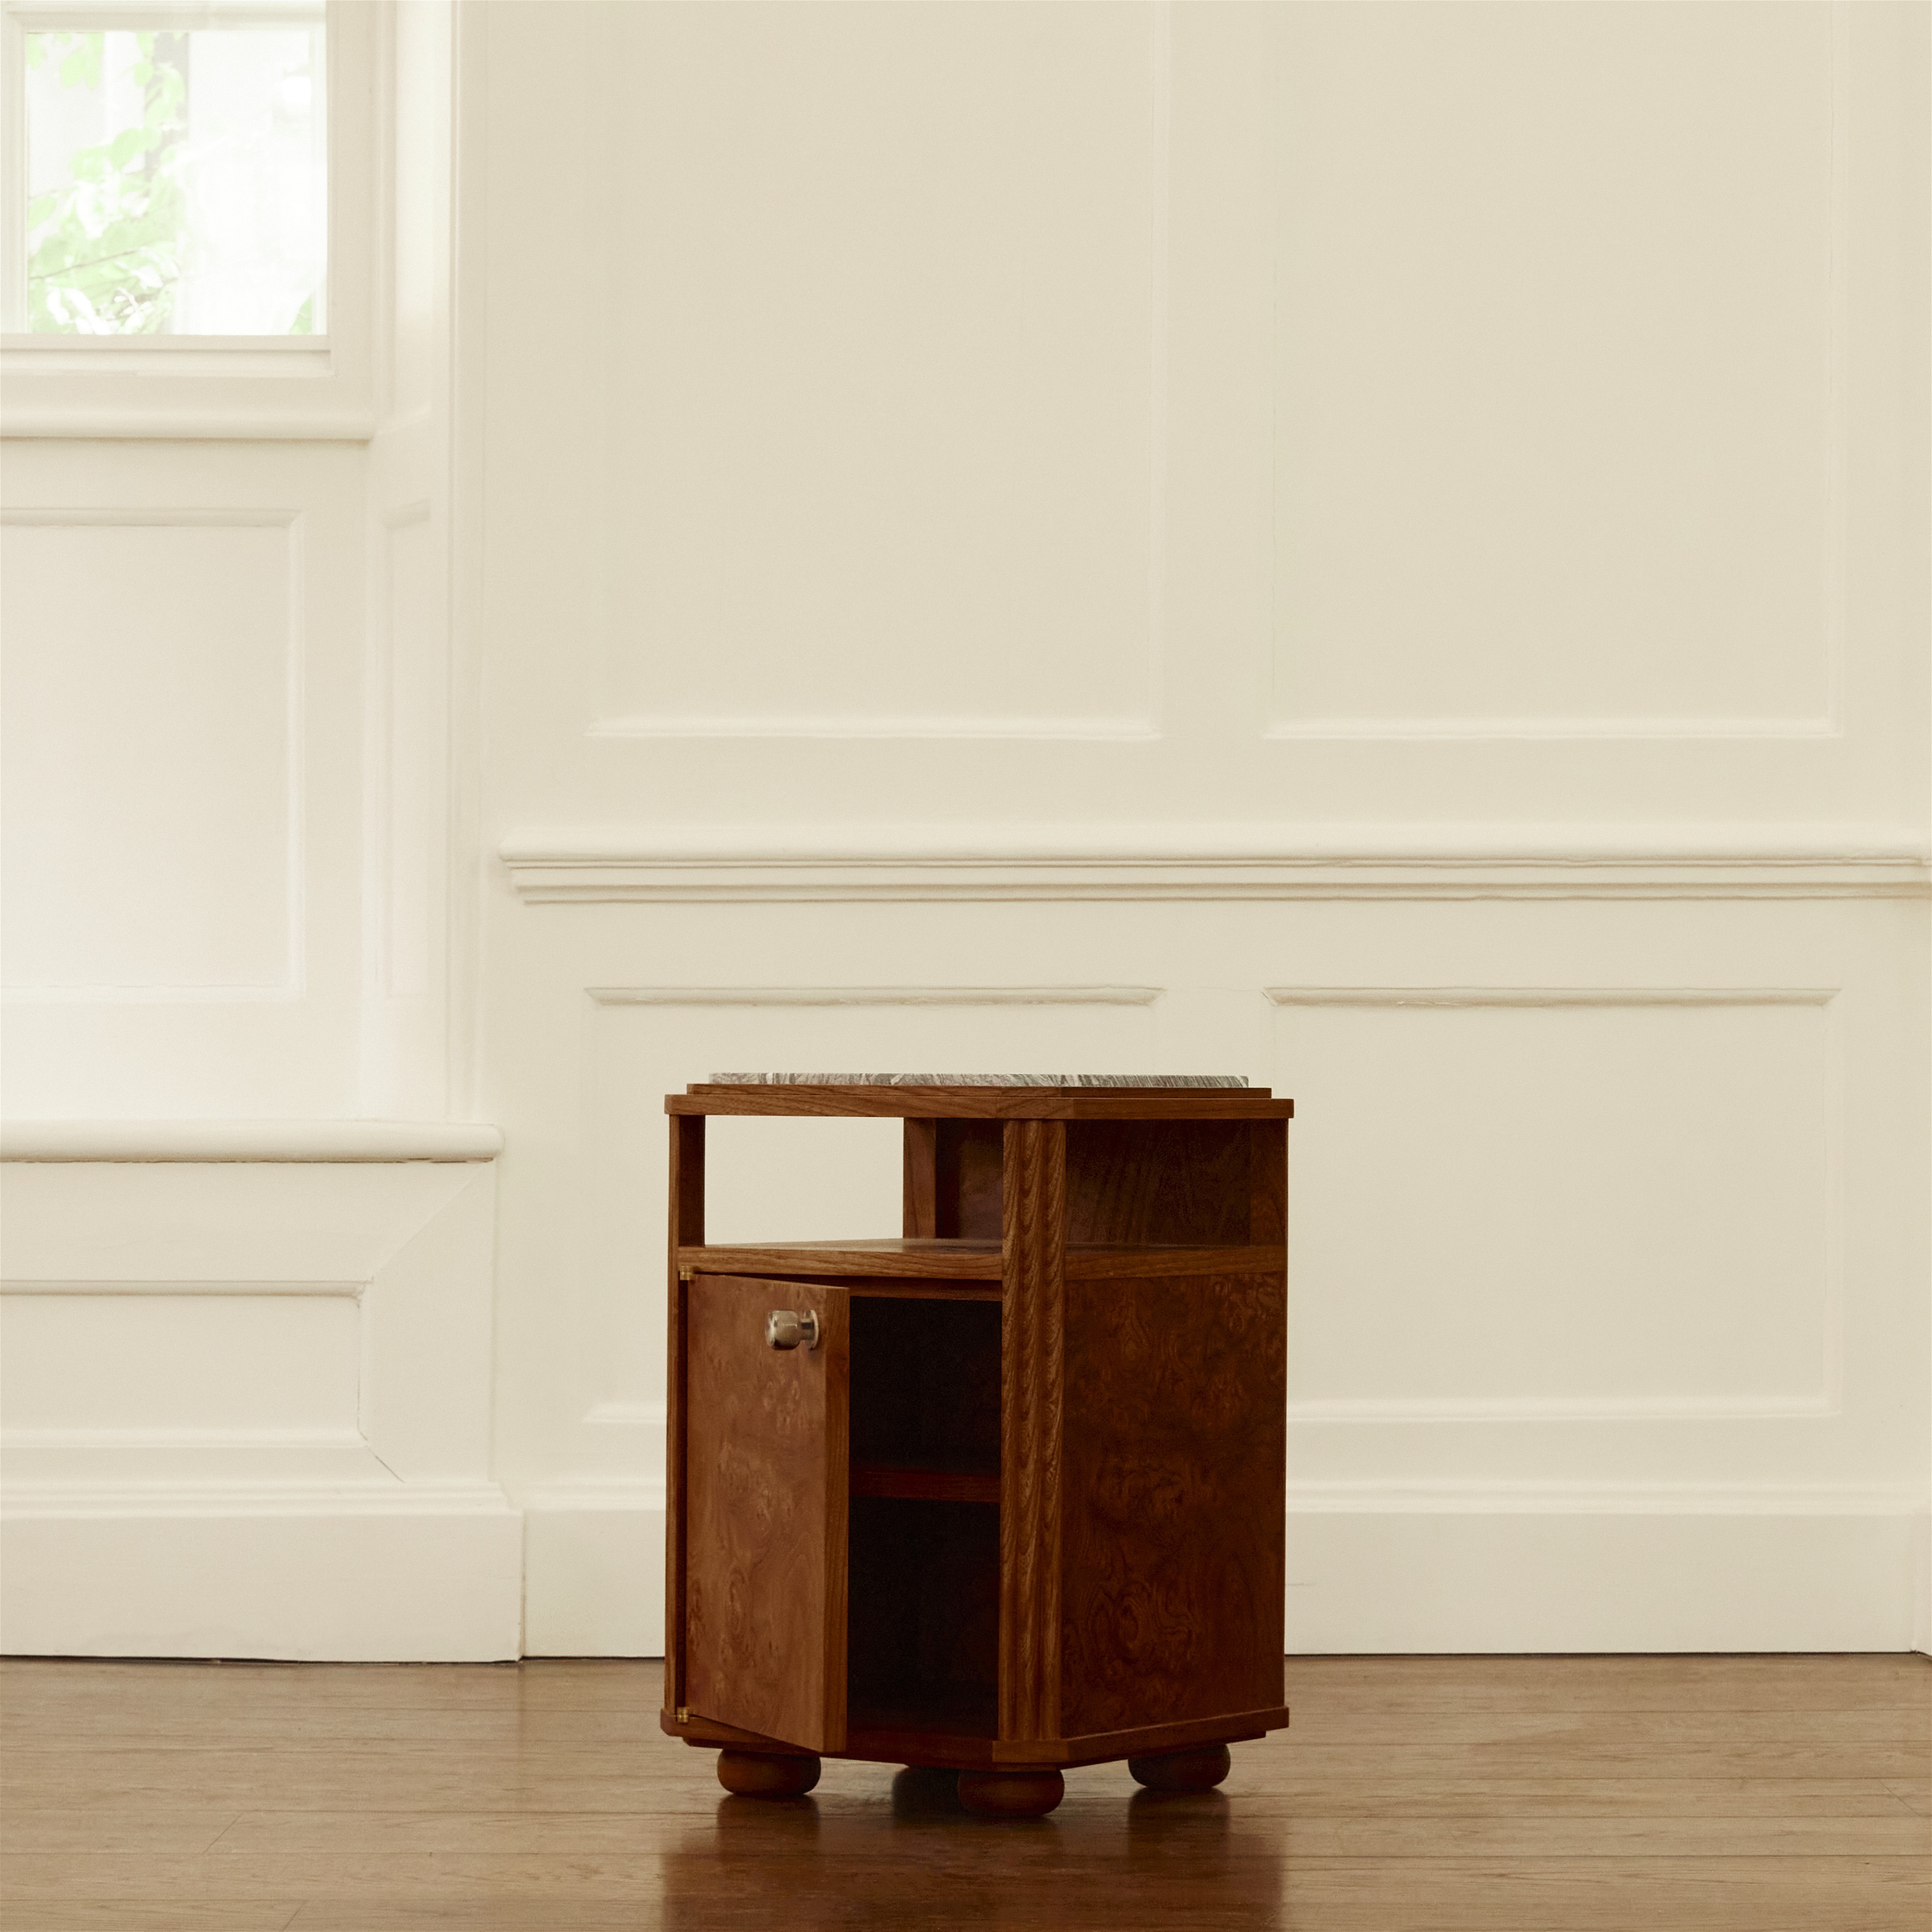 a small wooden cabinet sitting on top of a hard wood floor